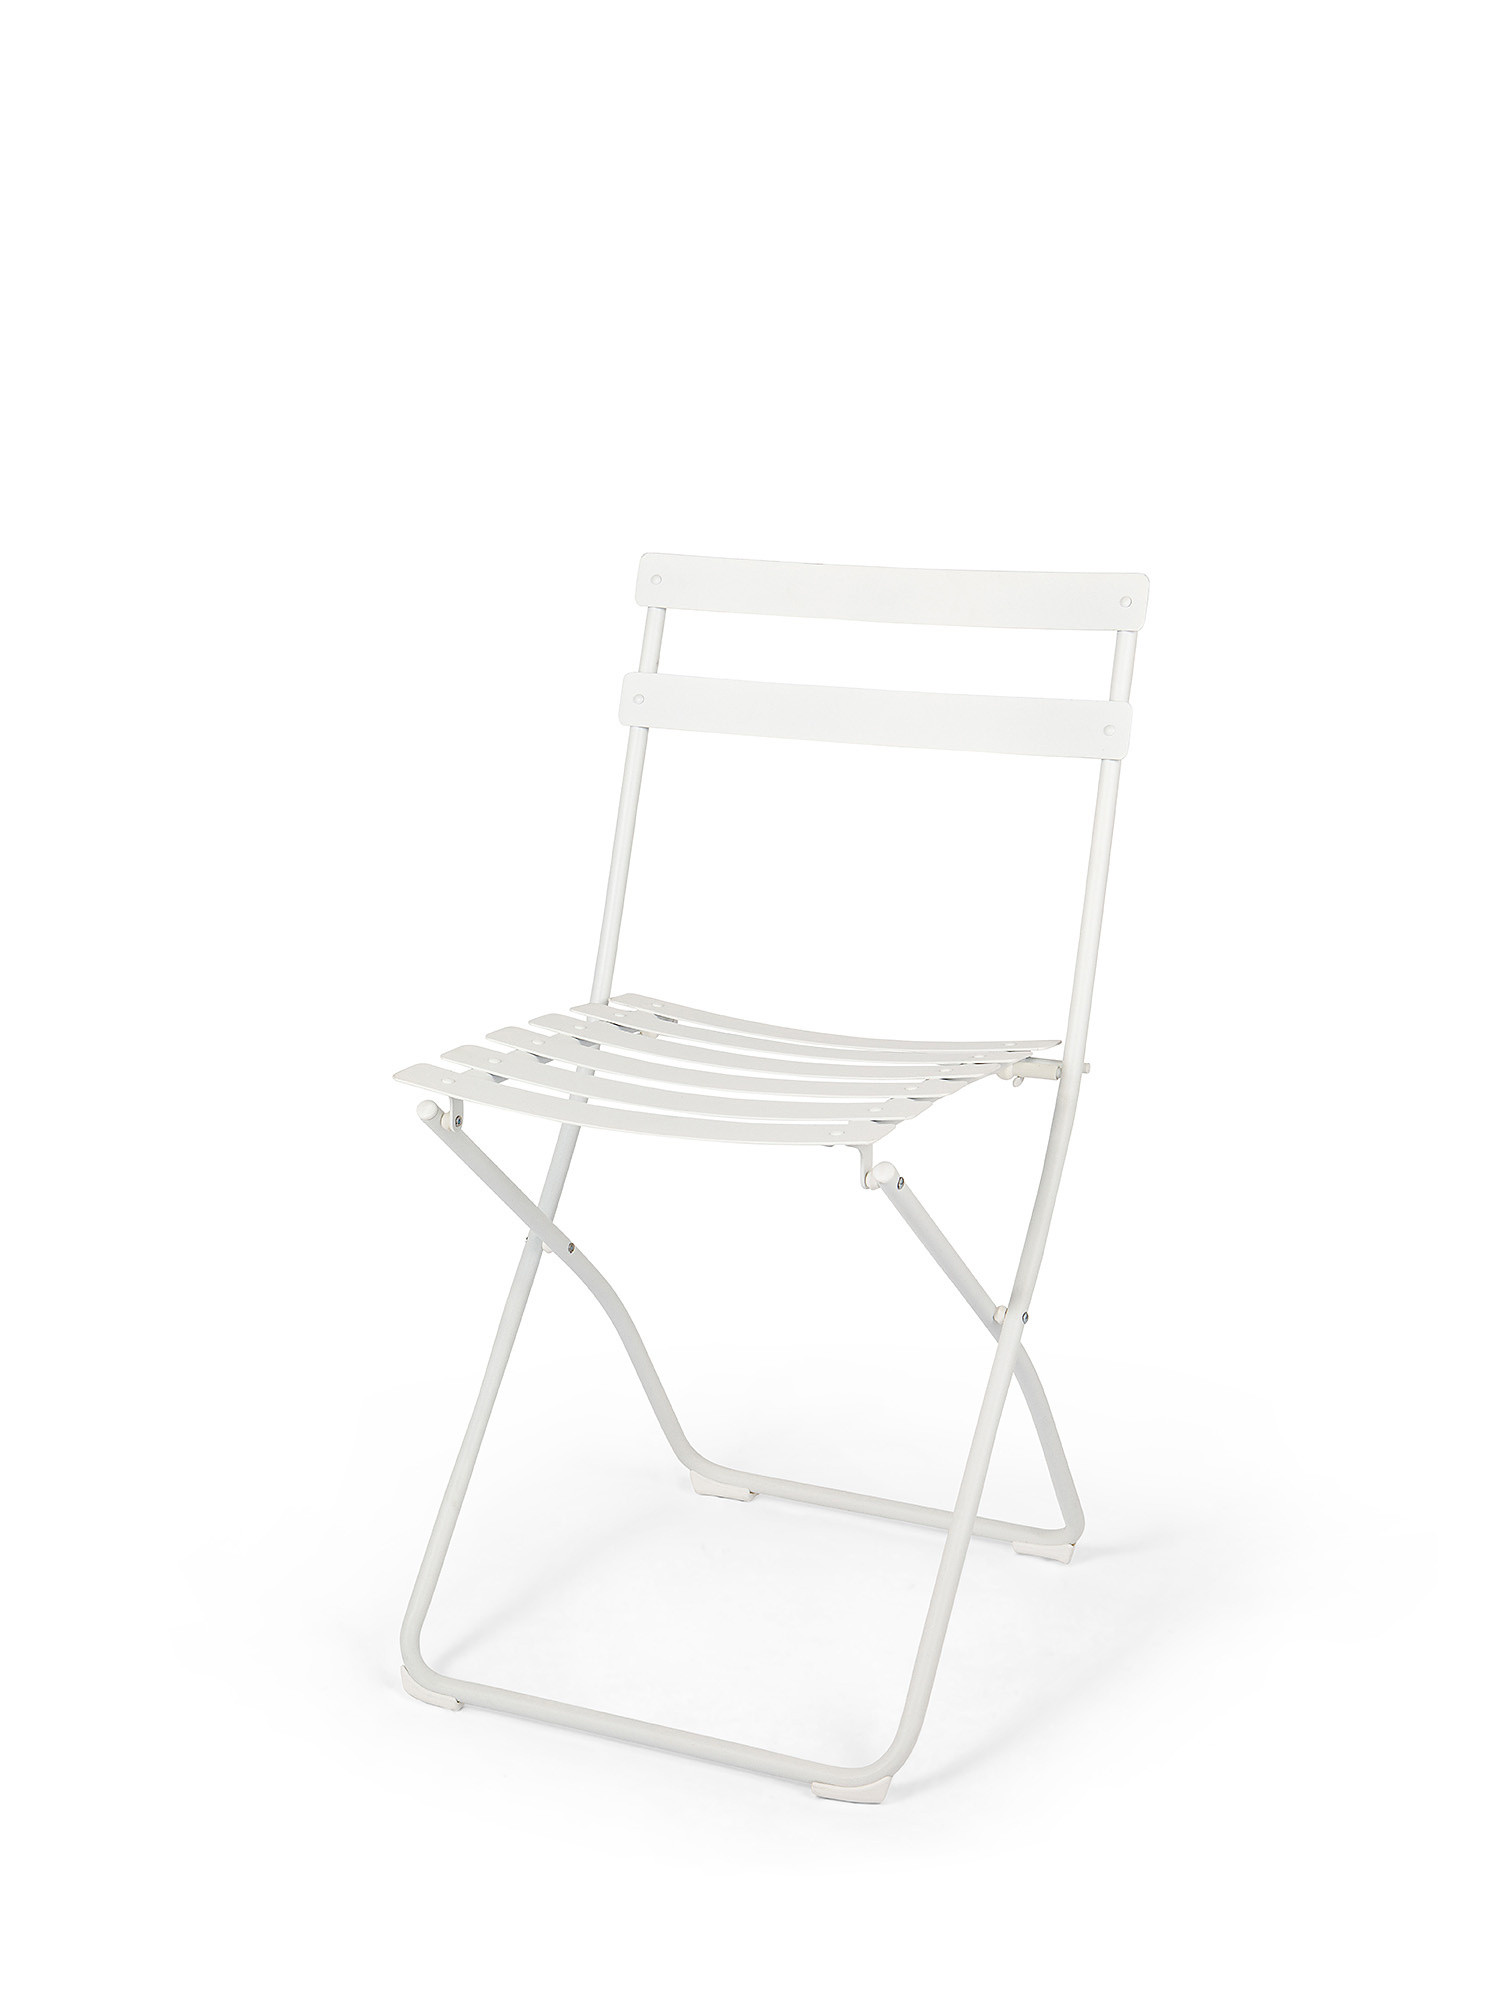 Fiam - Spring folding outdoor steel chair, White, large image number 0